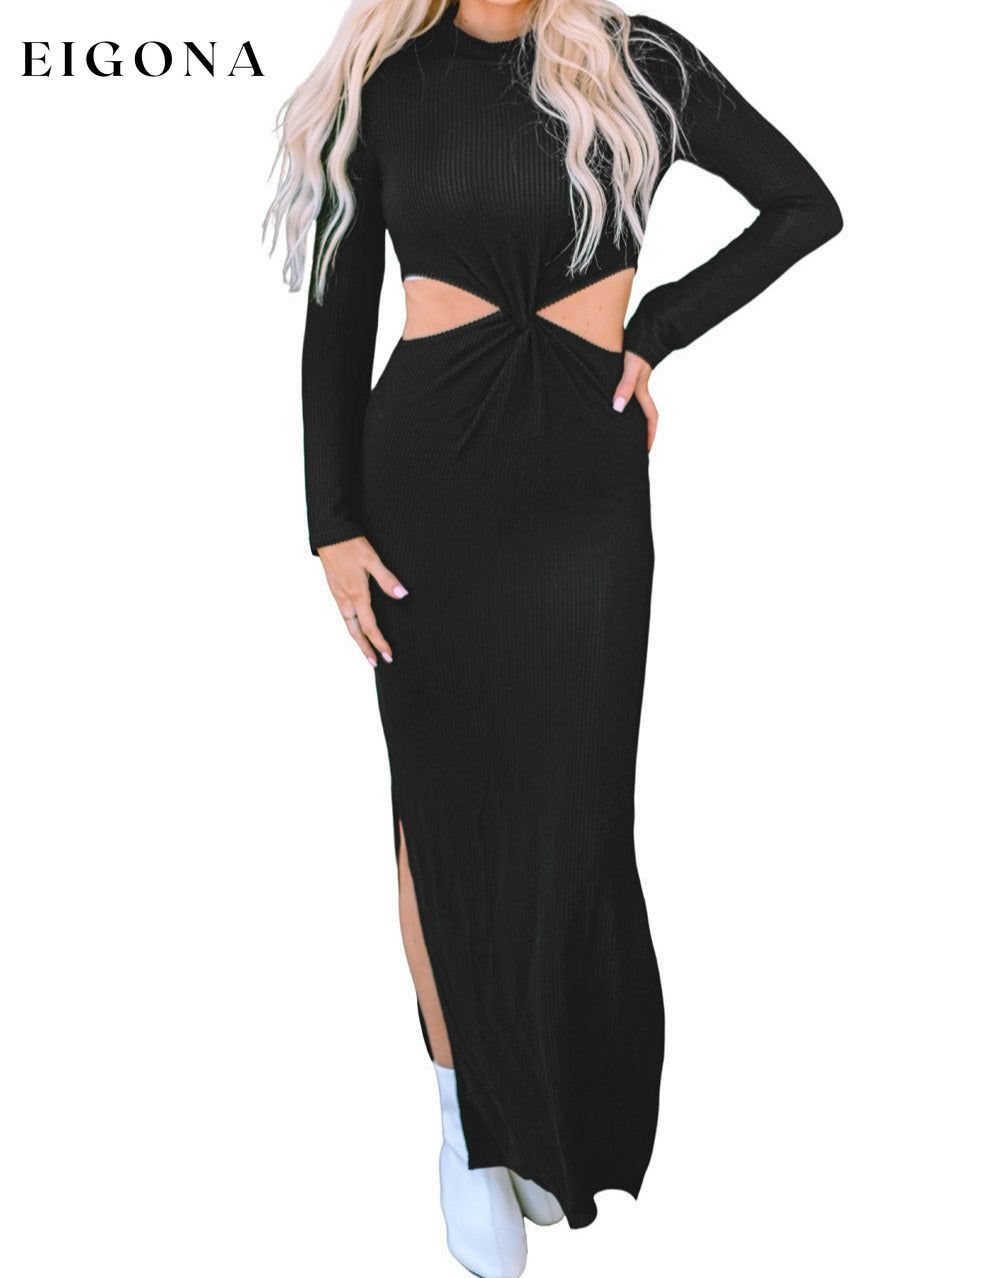 Black Ribbed Twist Cutout Long Sleeve Dress All In Stock clothes Detail Cut Out dresses Hot picks long sleeve dresses maxi dress Occasion Daily Season Fall & Autumn Silhouette Bodycon Style Southern Belle